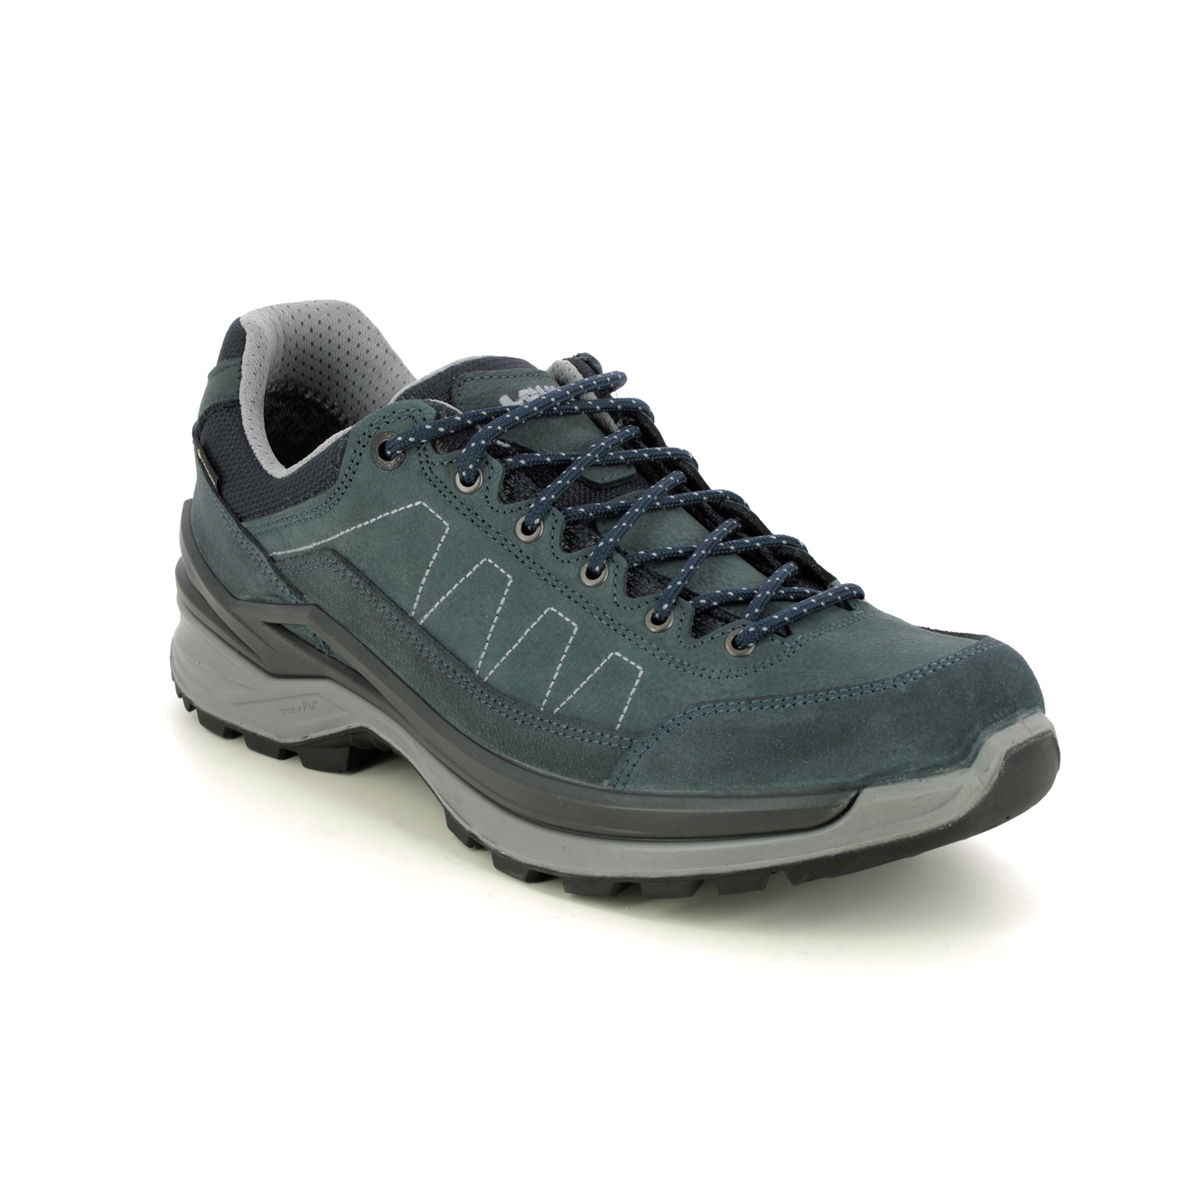 Lowa Toro Pro Gtx Lo Mens Walking Shoes In Navy Leather 310931-6130 In Regular Fit Mens Uk Size 12 In Plain Navy Leather